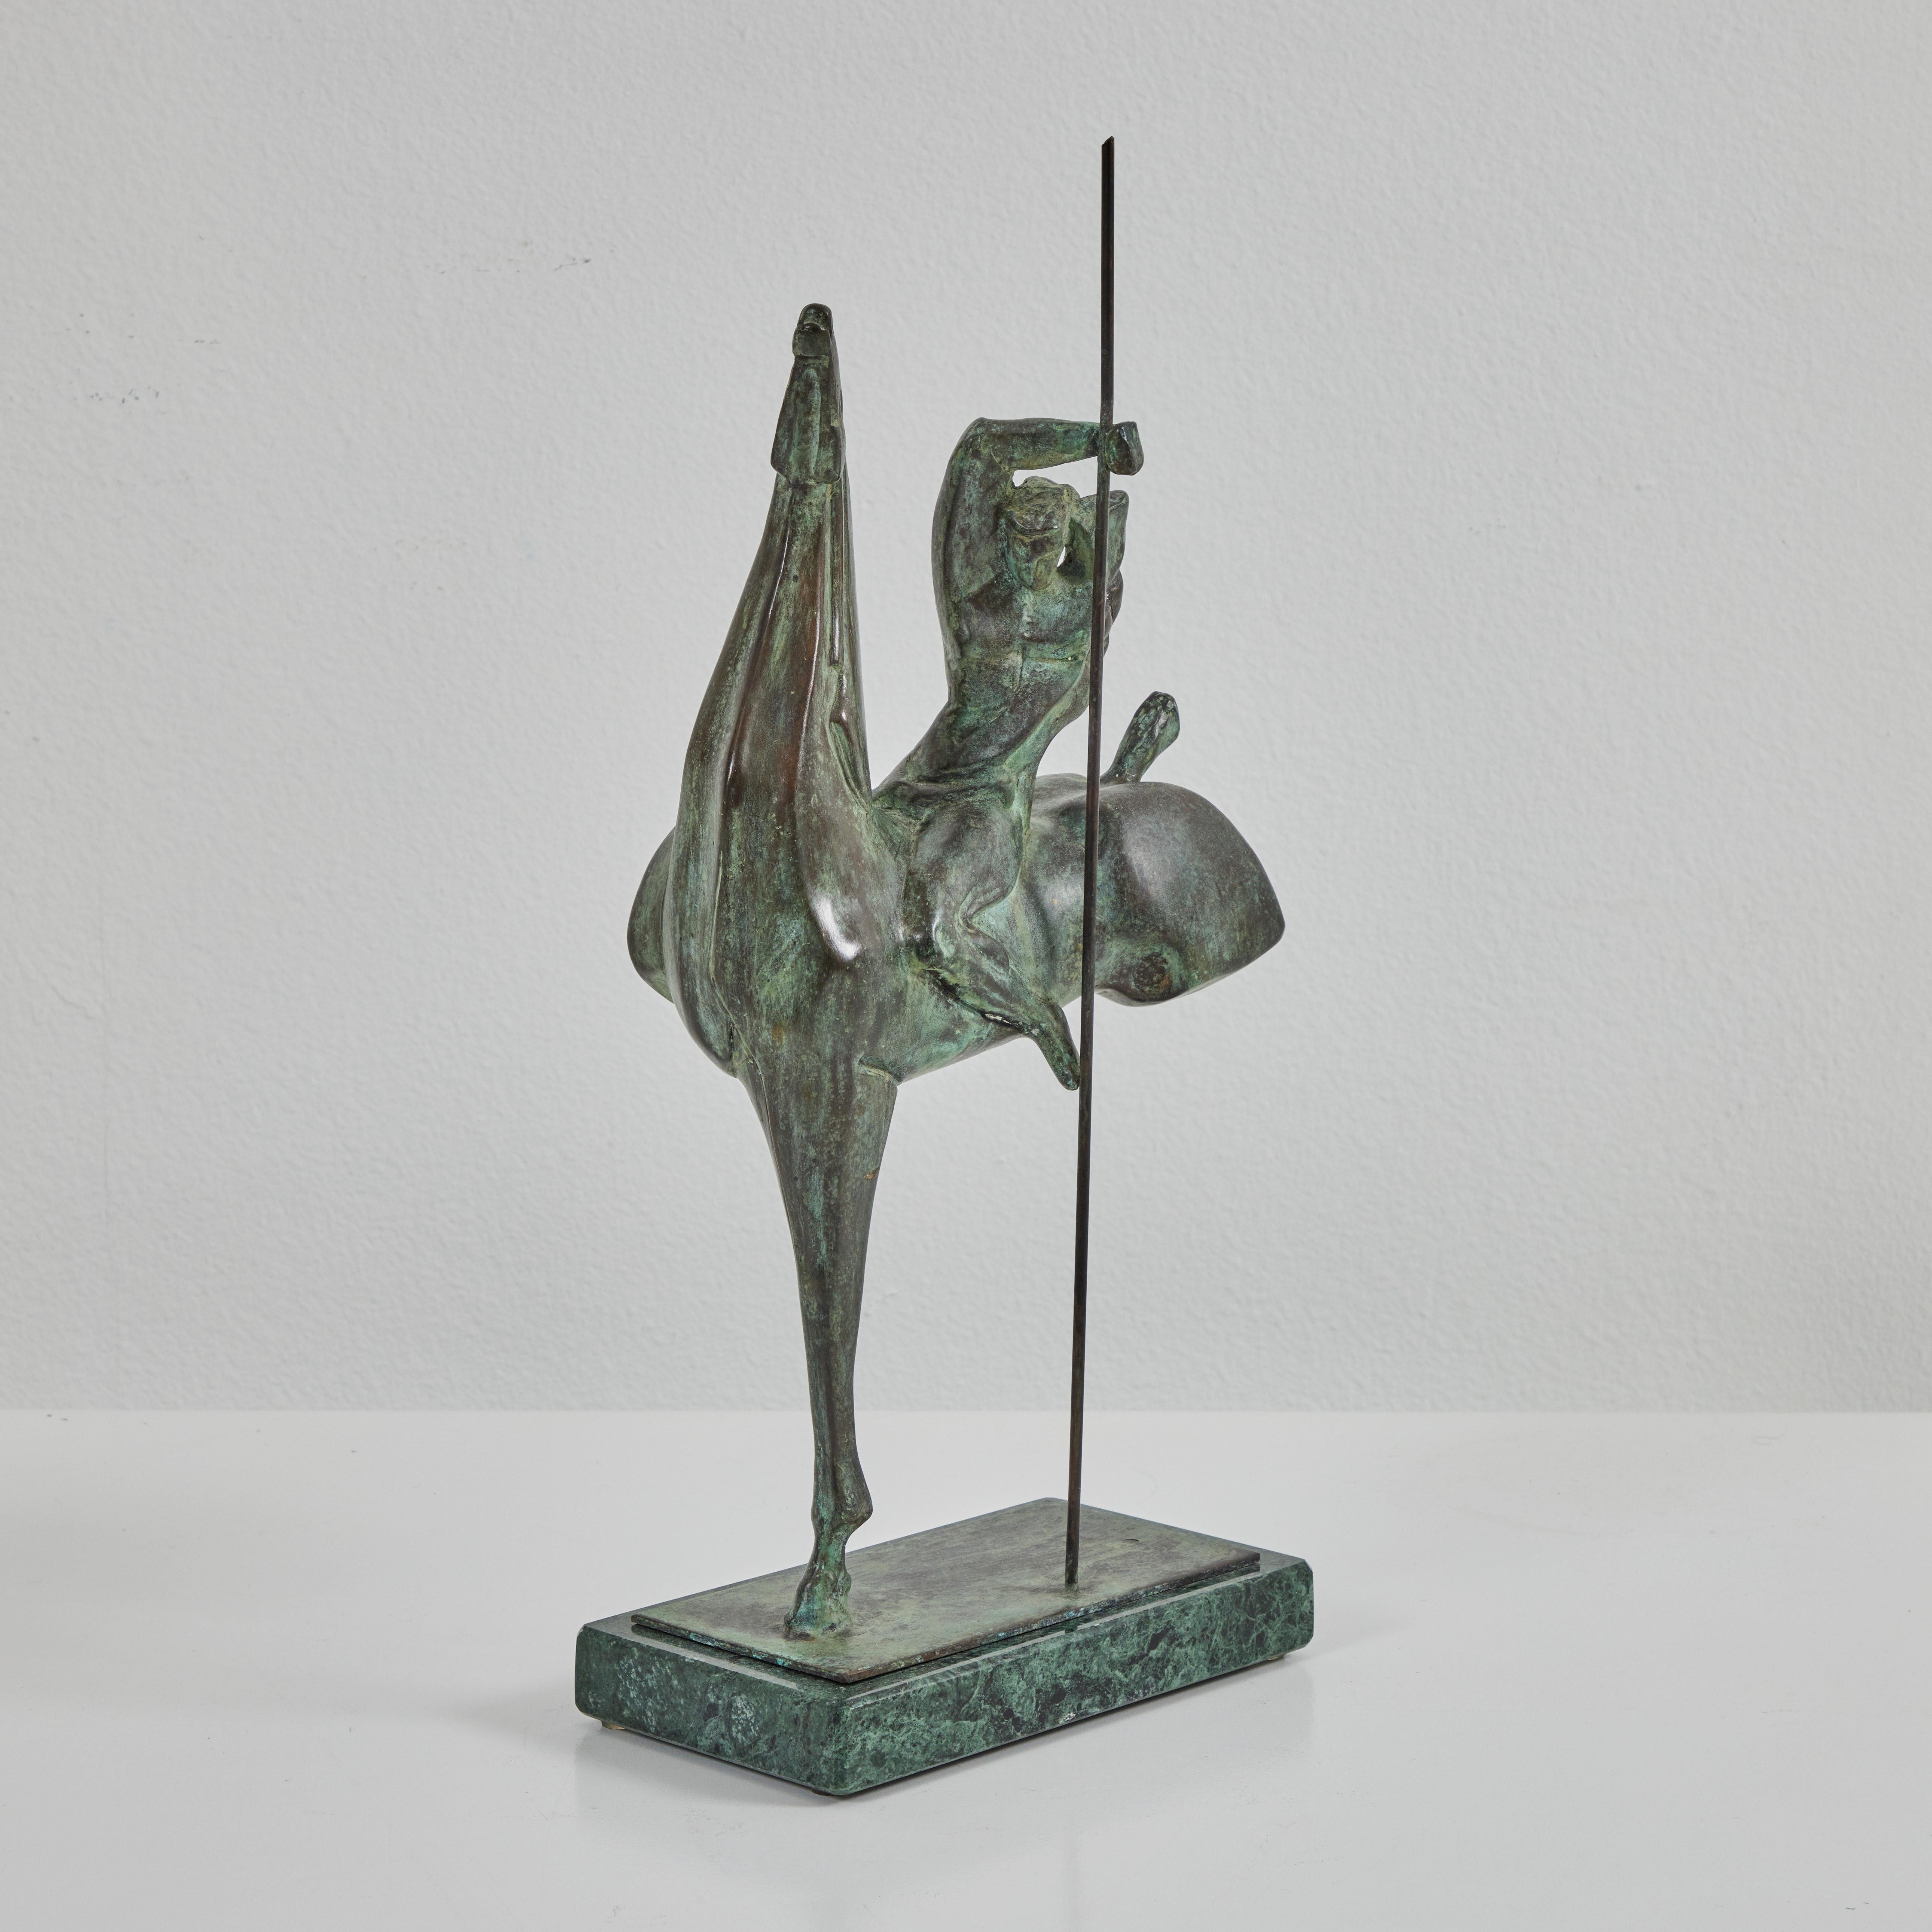 This sculpture by Claudio Nicoli portrays a cavalier on a horse with a staff. The unique patina creates the appearance of texture. The base is marble. The piece has been signed by Claudio Nicoli and numbered 3/6 on the rear of the horse. 

Born in